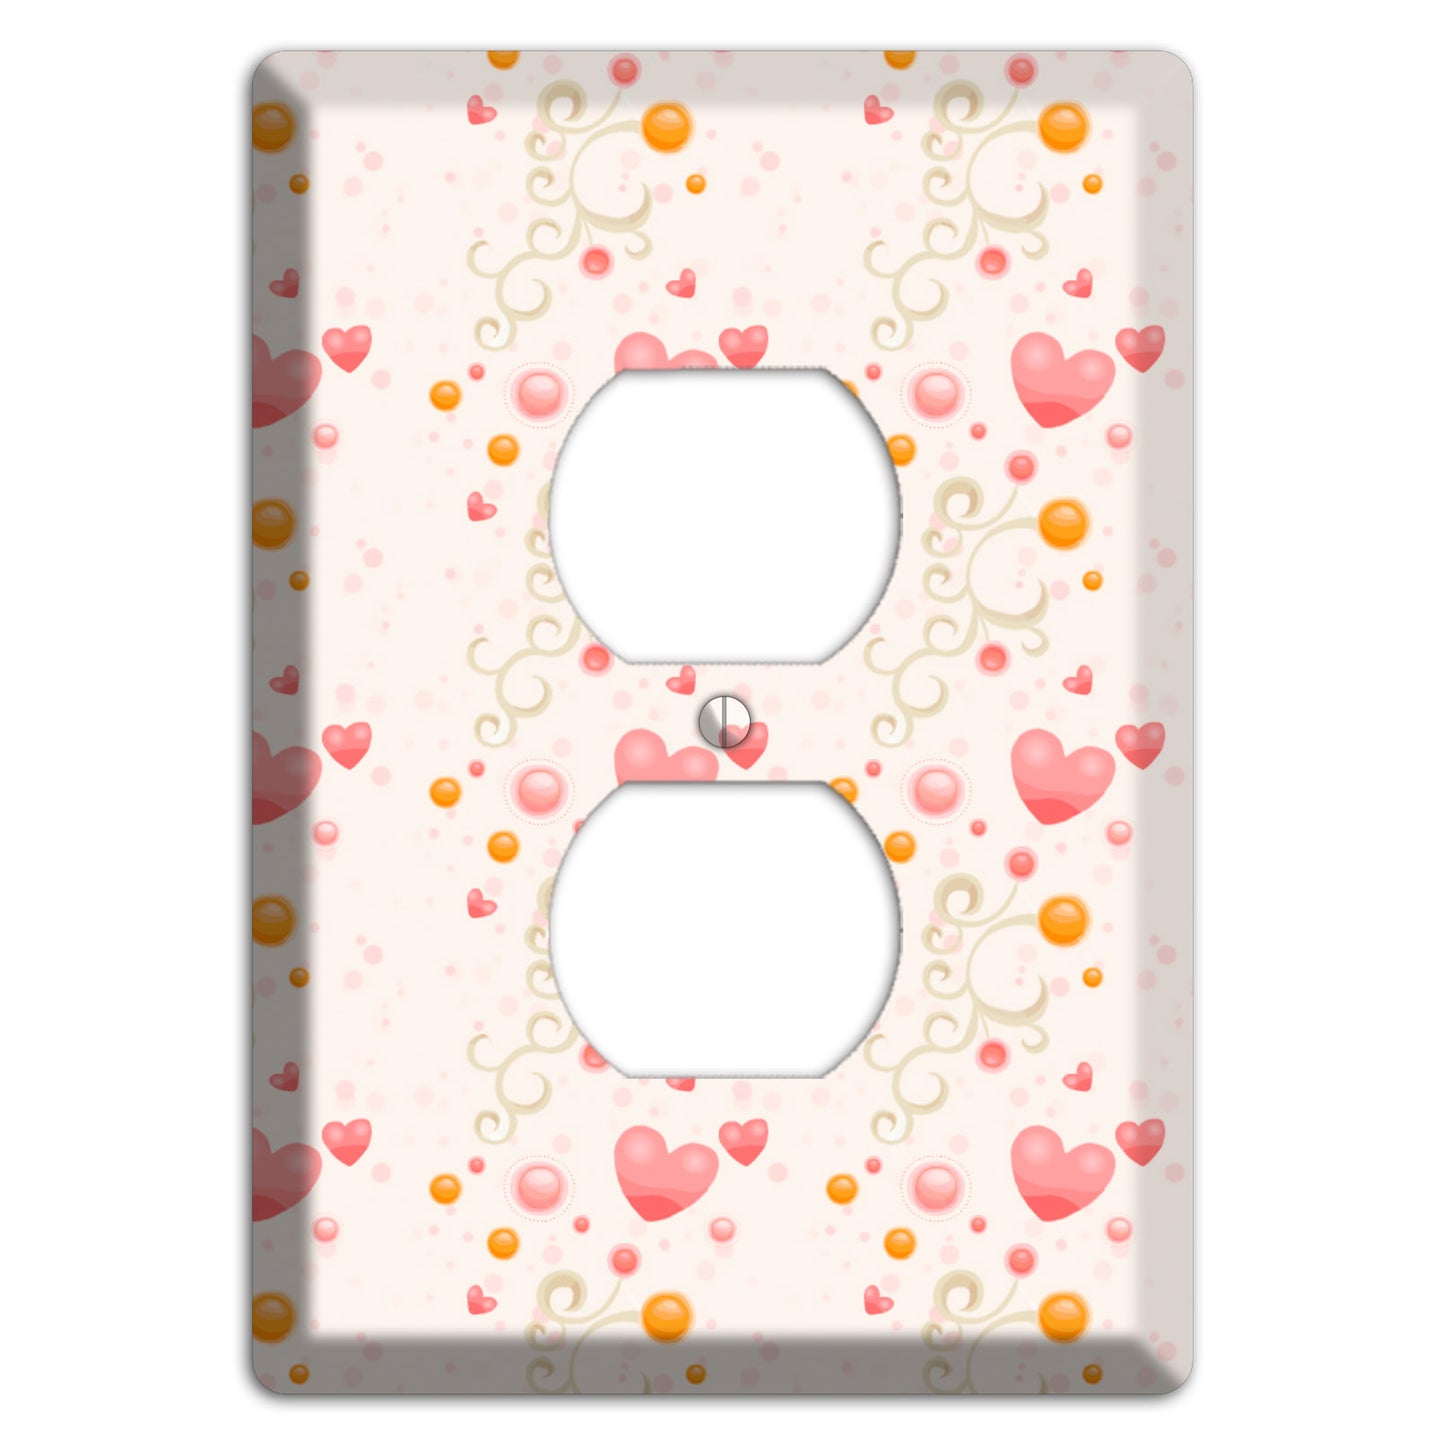 Bubbly Hearts Duplex Outlet Wallplate